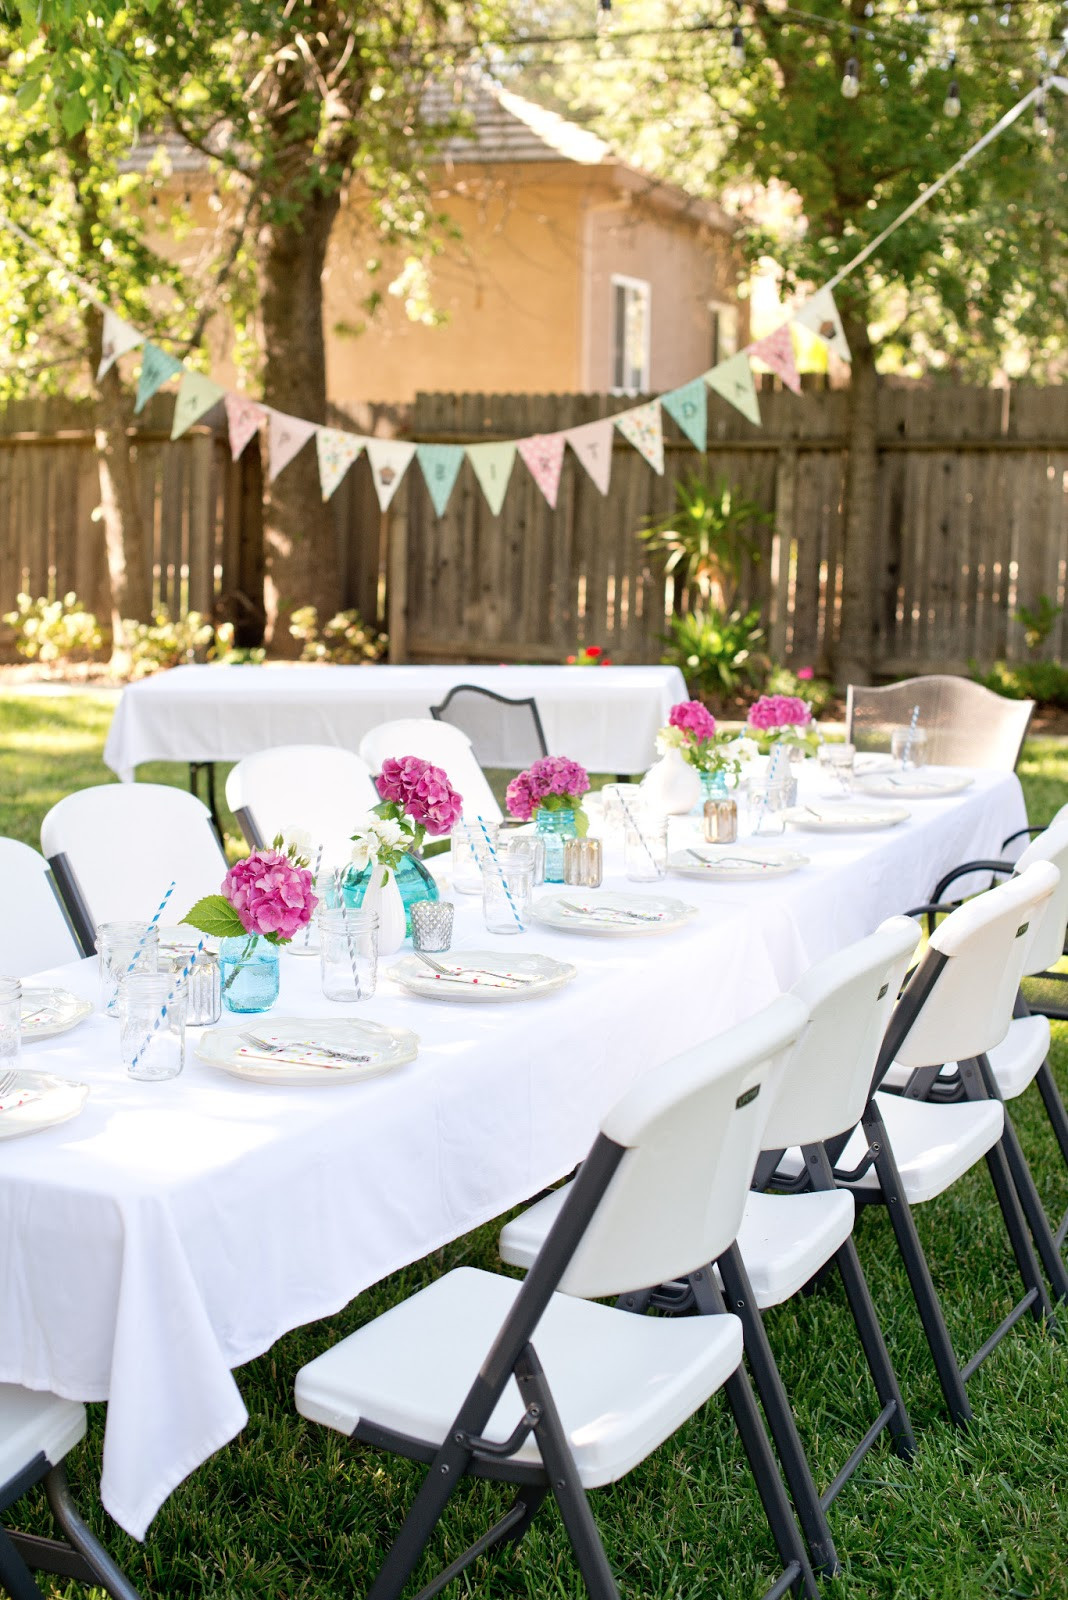 Backyard Graduation Party Decorations
 Backyard Party Decorations For Unfor table Moments